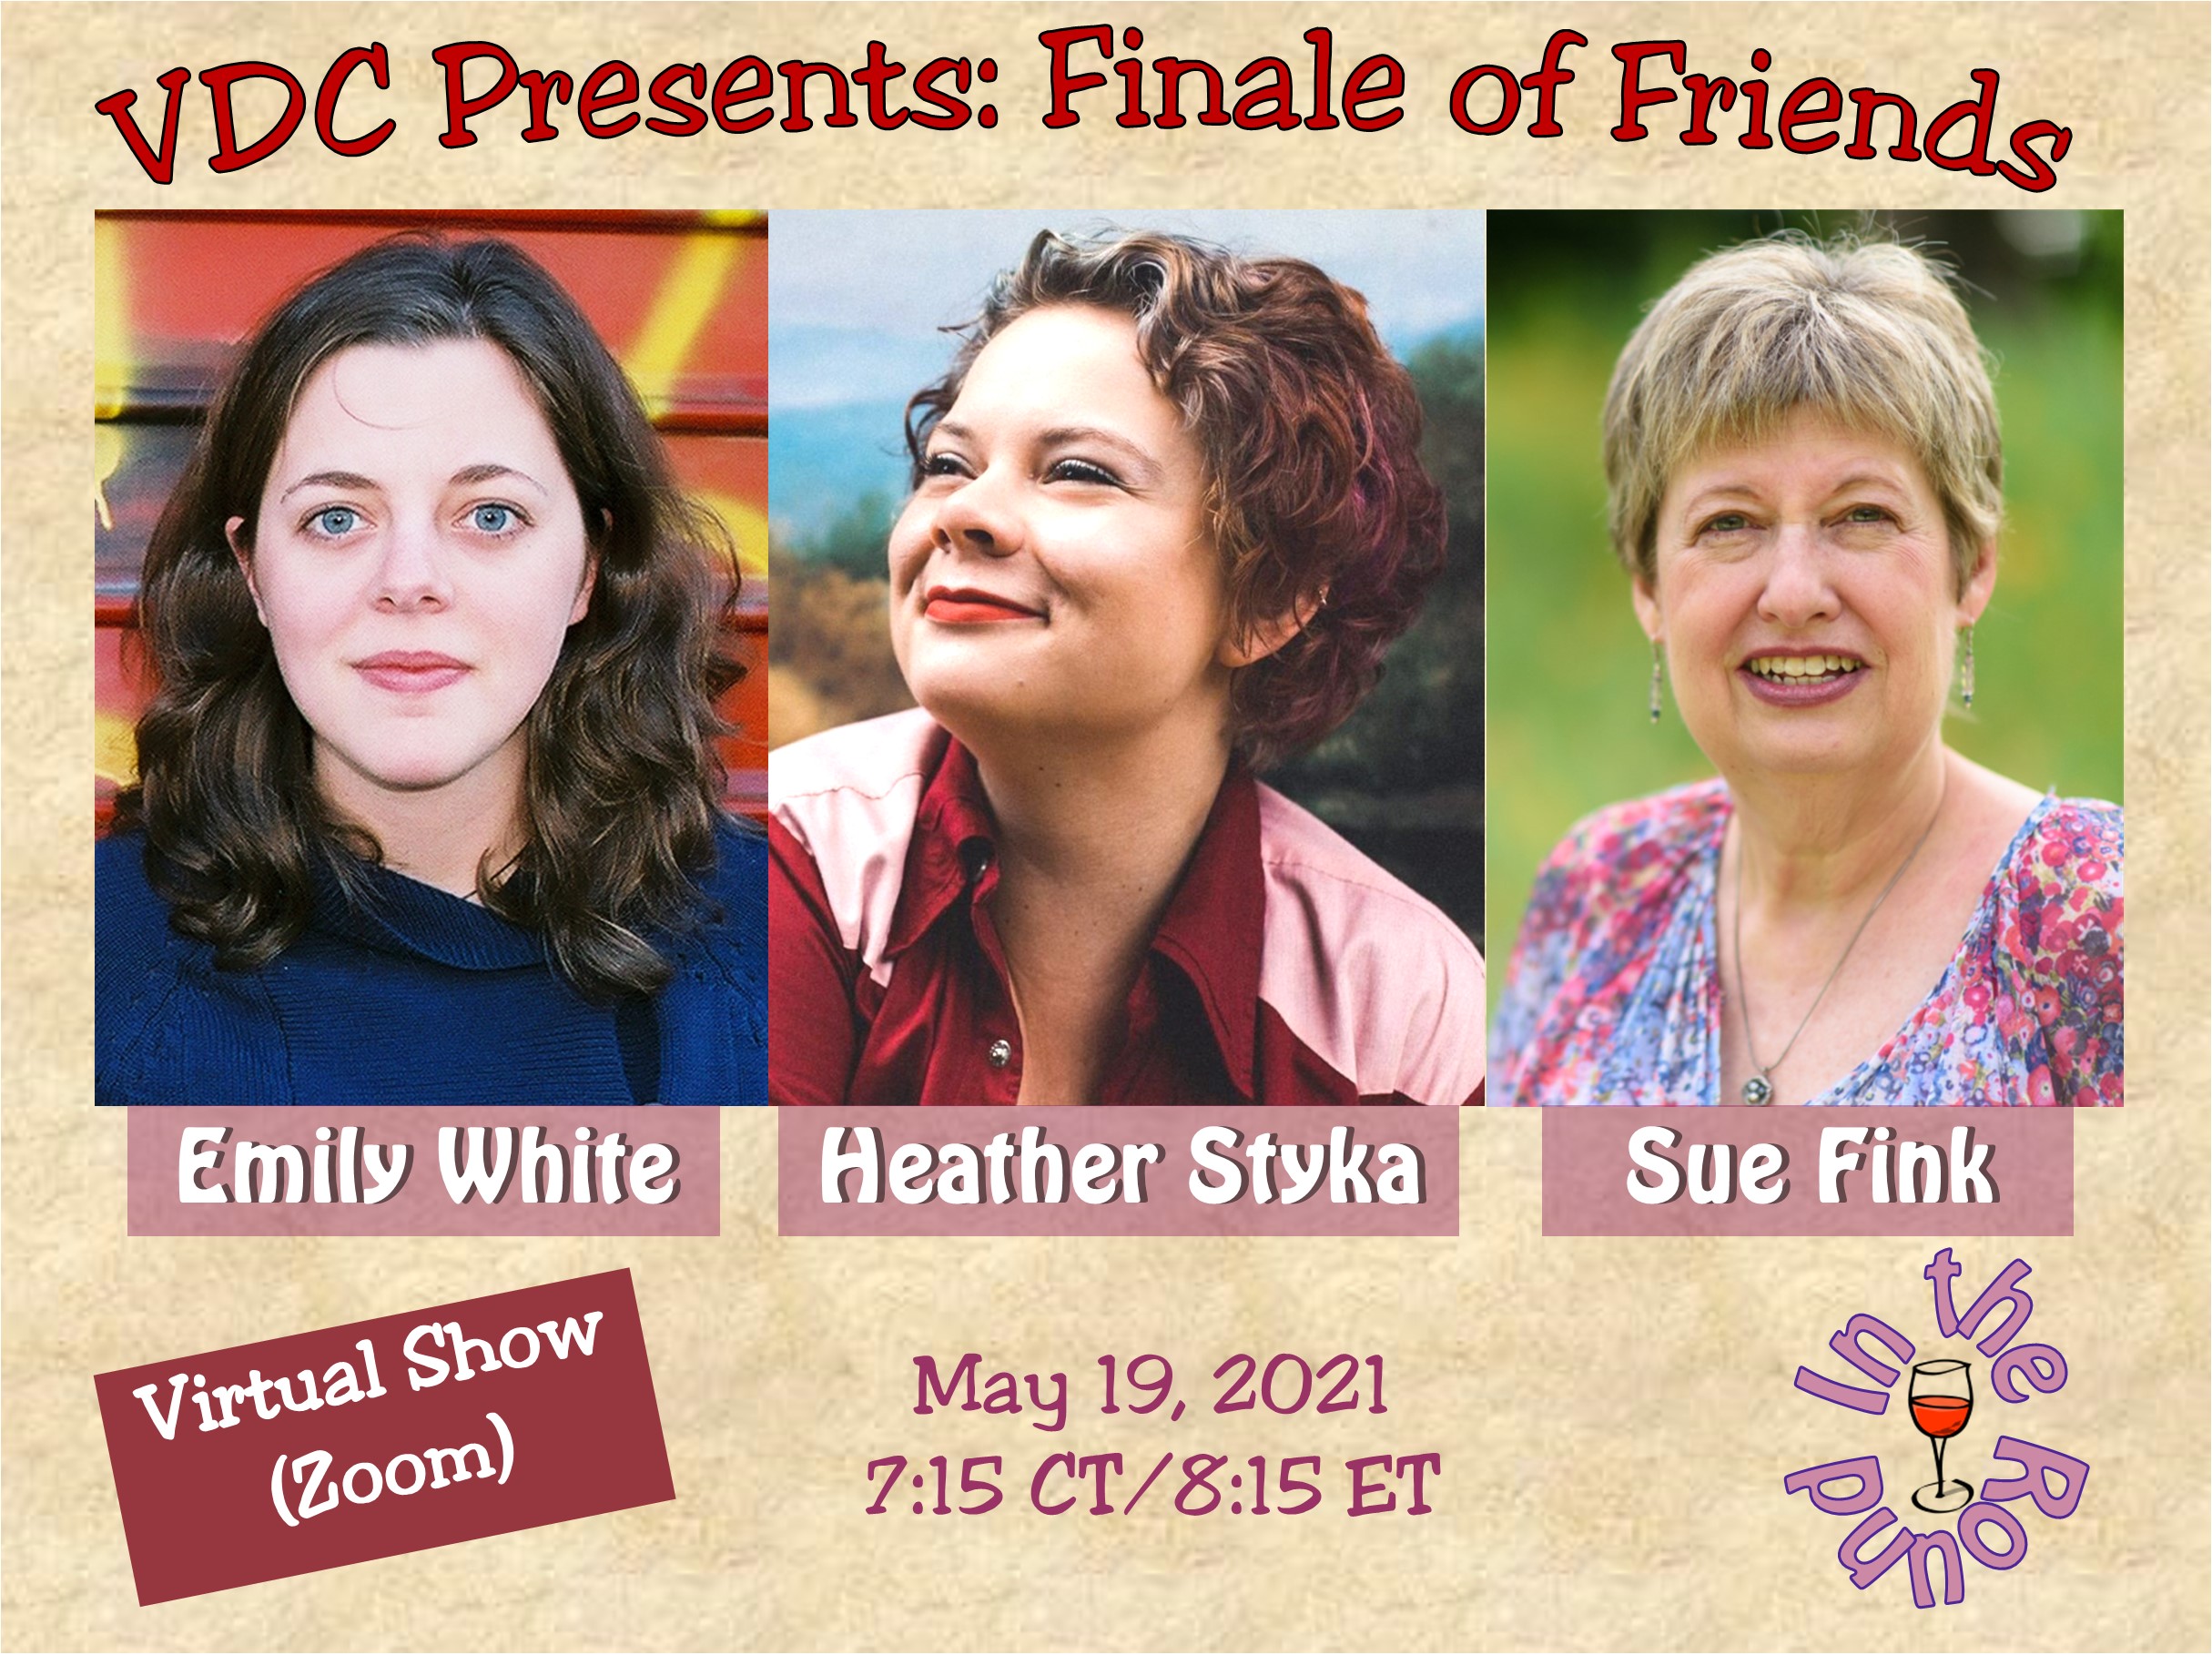 Virtual Dream Café Presents: 
Finale of Friends: Emily White, Heather Styka, and Sue Fink In-the-Round